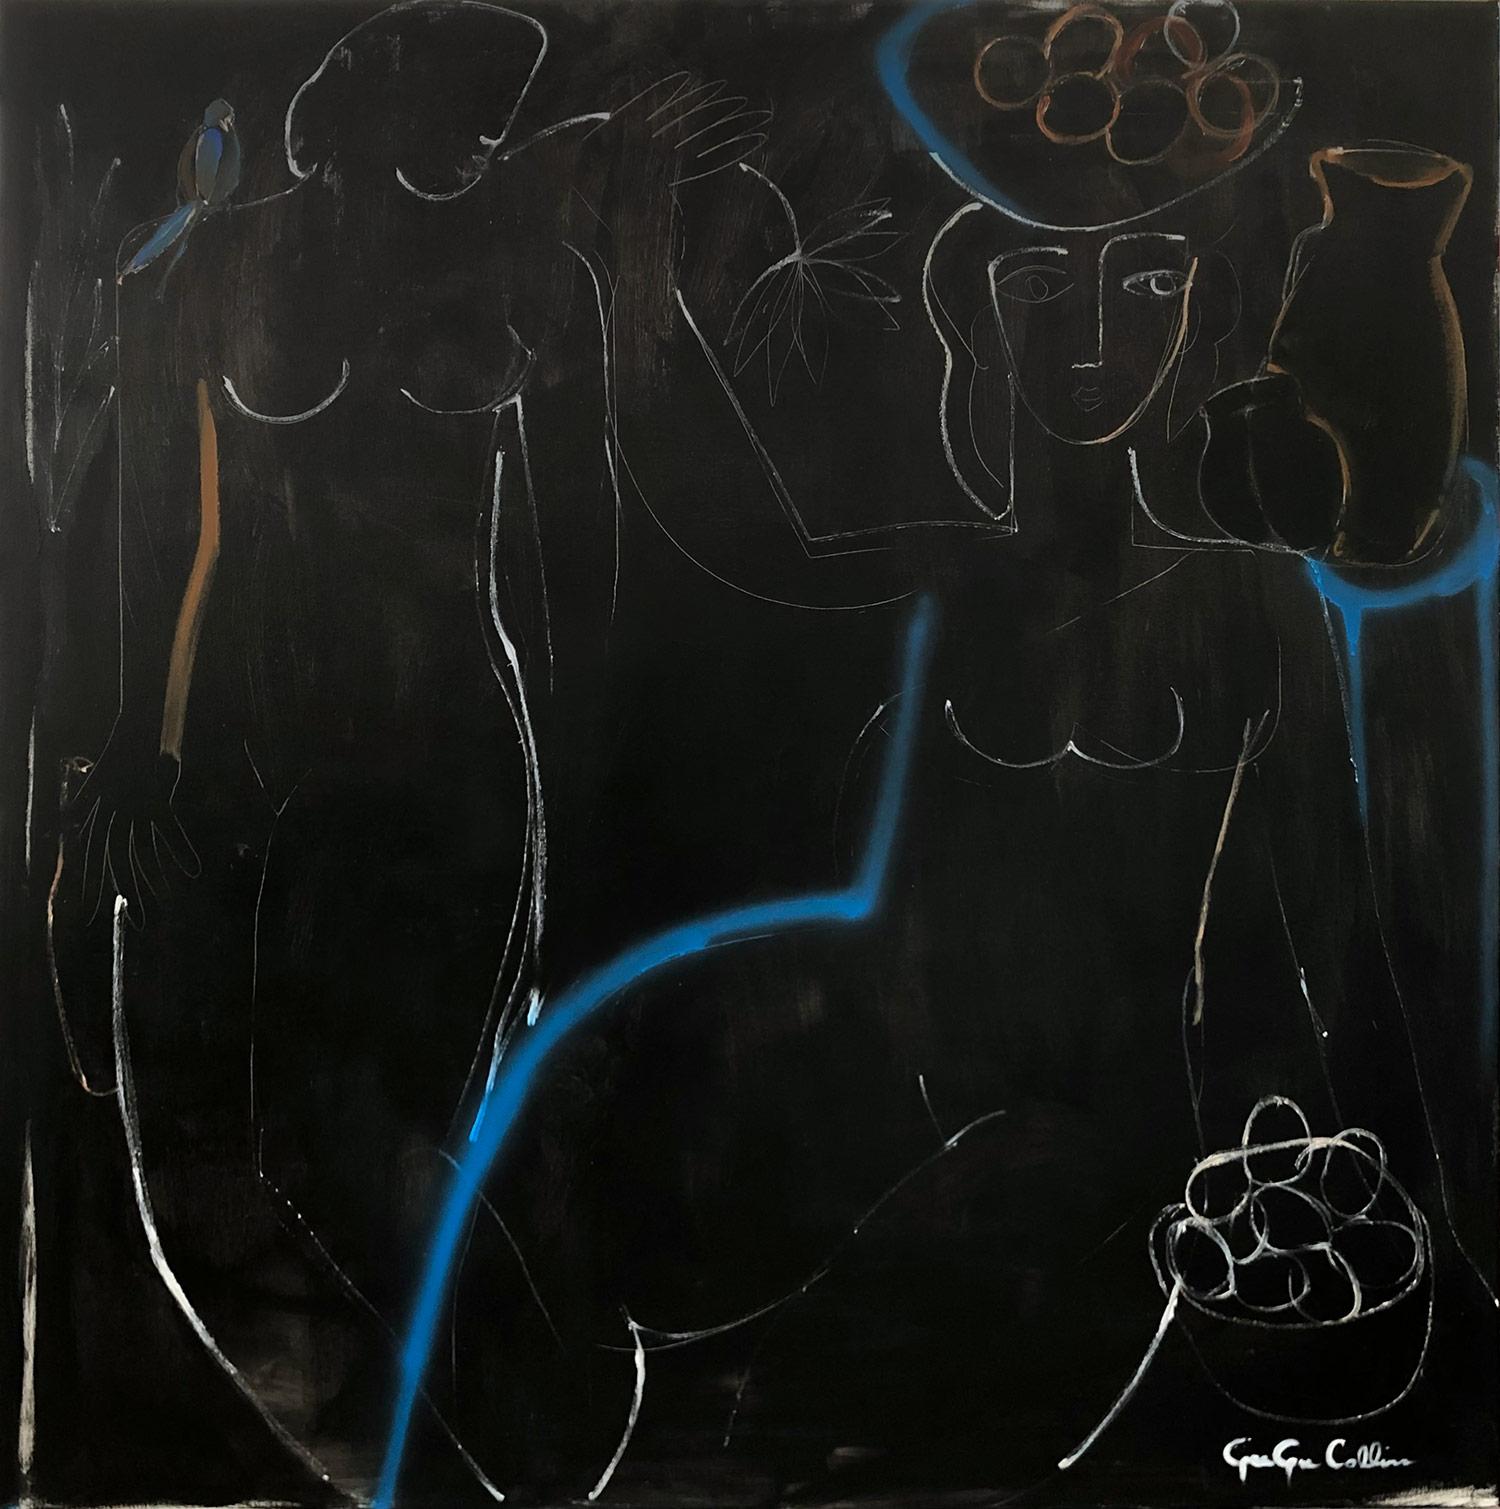 Gee Gee Collins Figurative Painting - "Blue Line + Fruit" Modernist Black and White Abstract Nudes Painting on Canvas